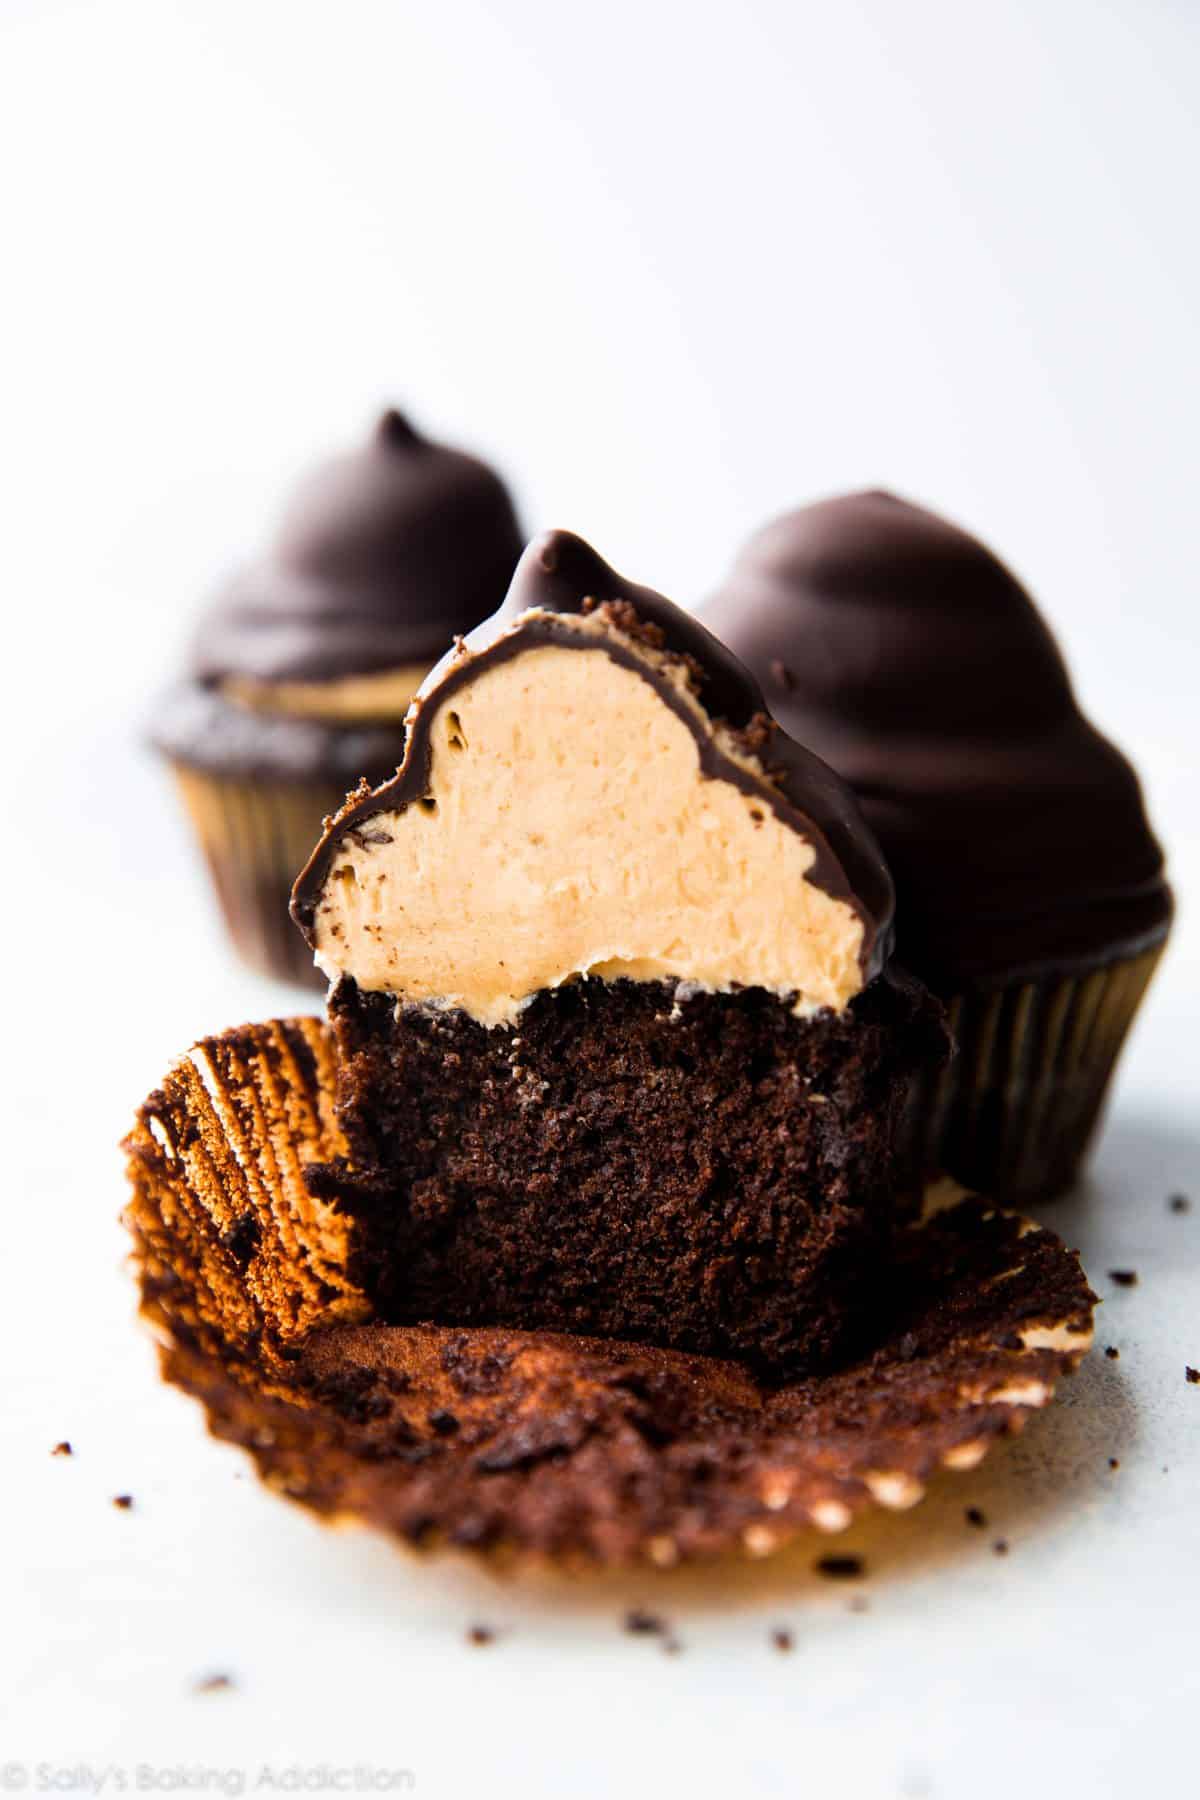 hi-hat cupcake cut in half showing chocolate cupcake topped with peanut butter frosting inside a chocolate coating